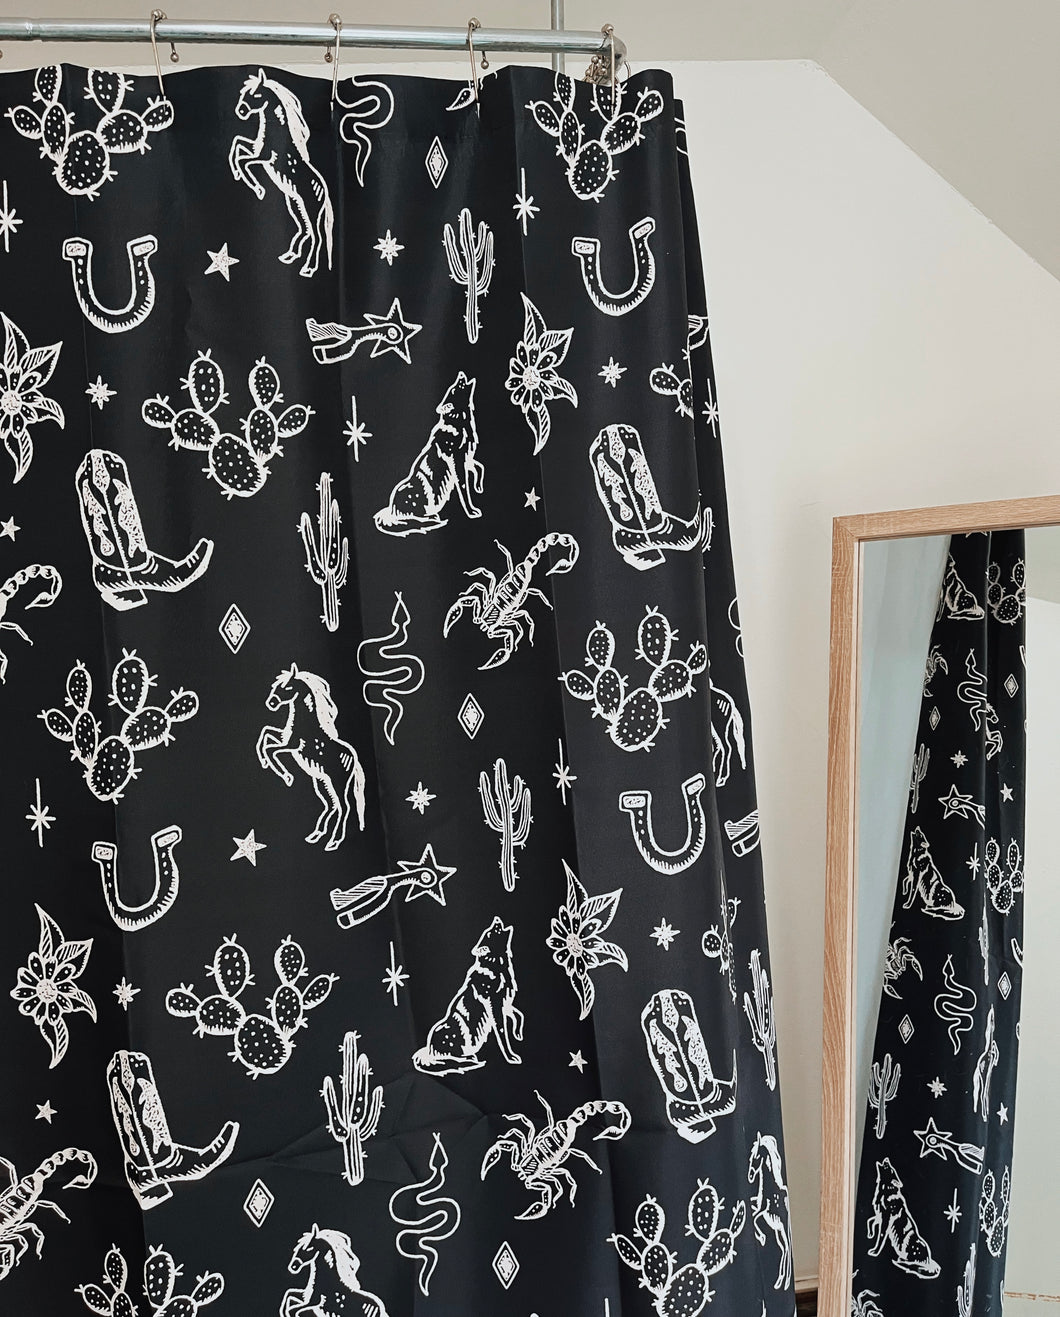 Night Out West - Shower Curtain